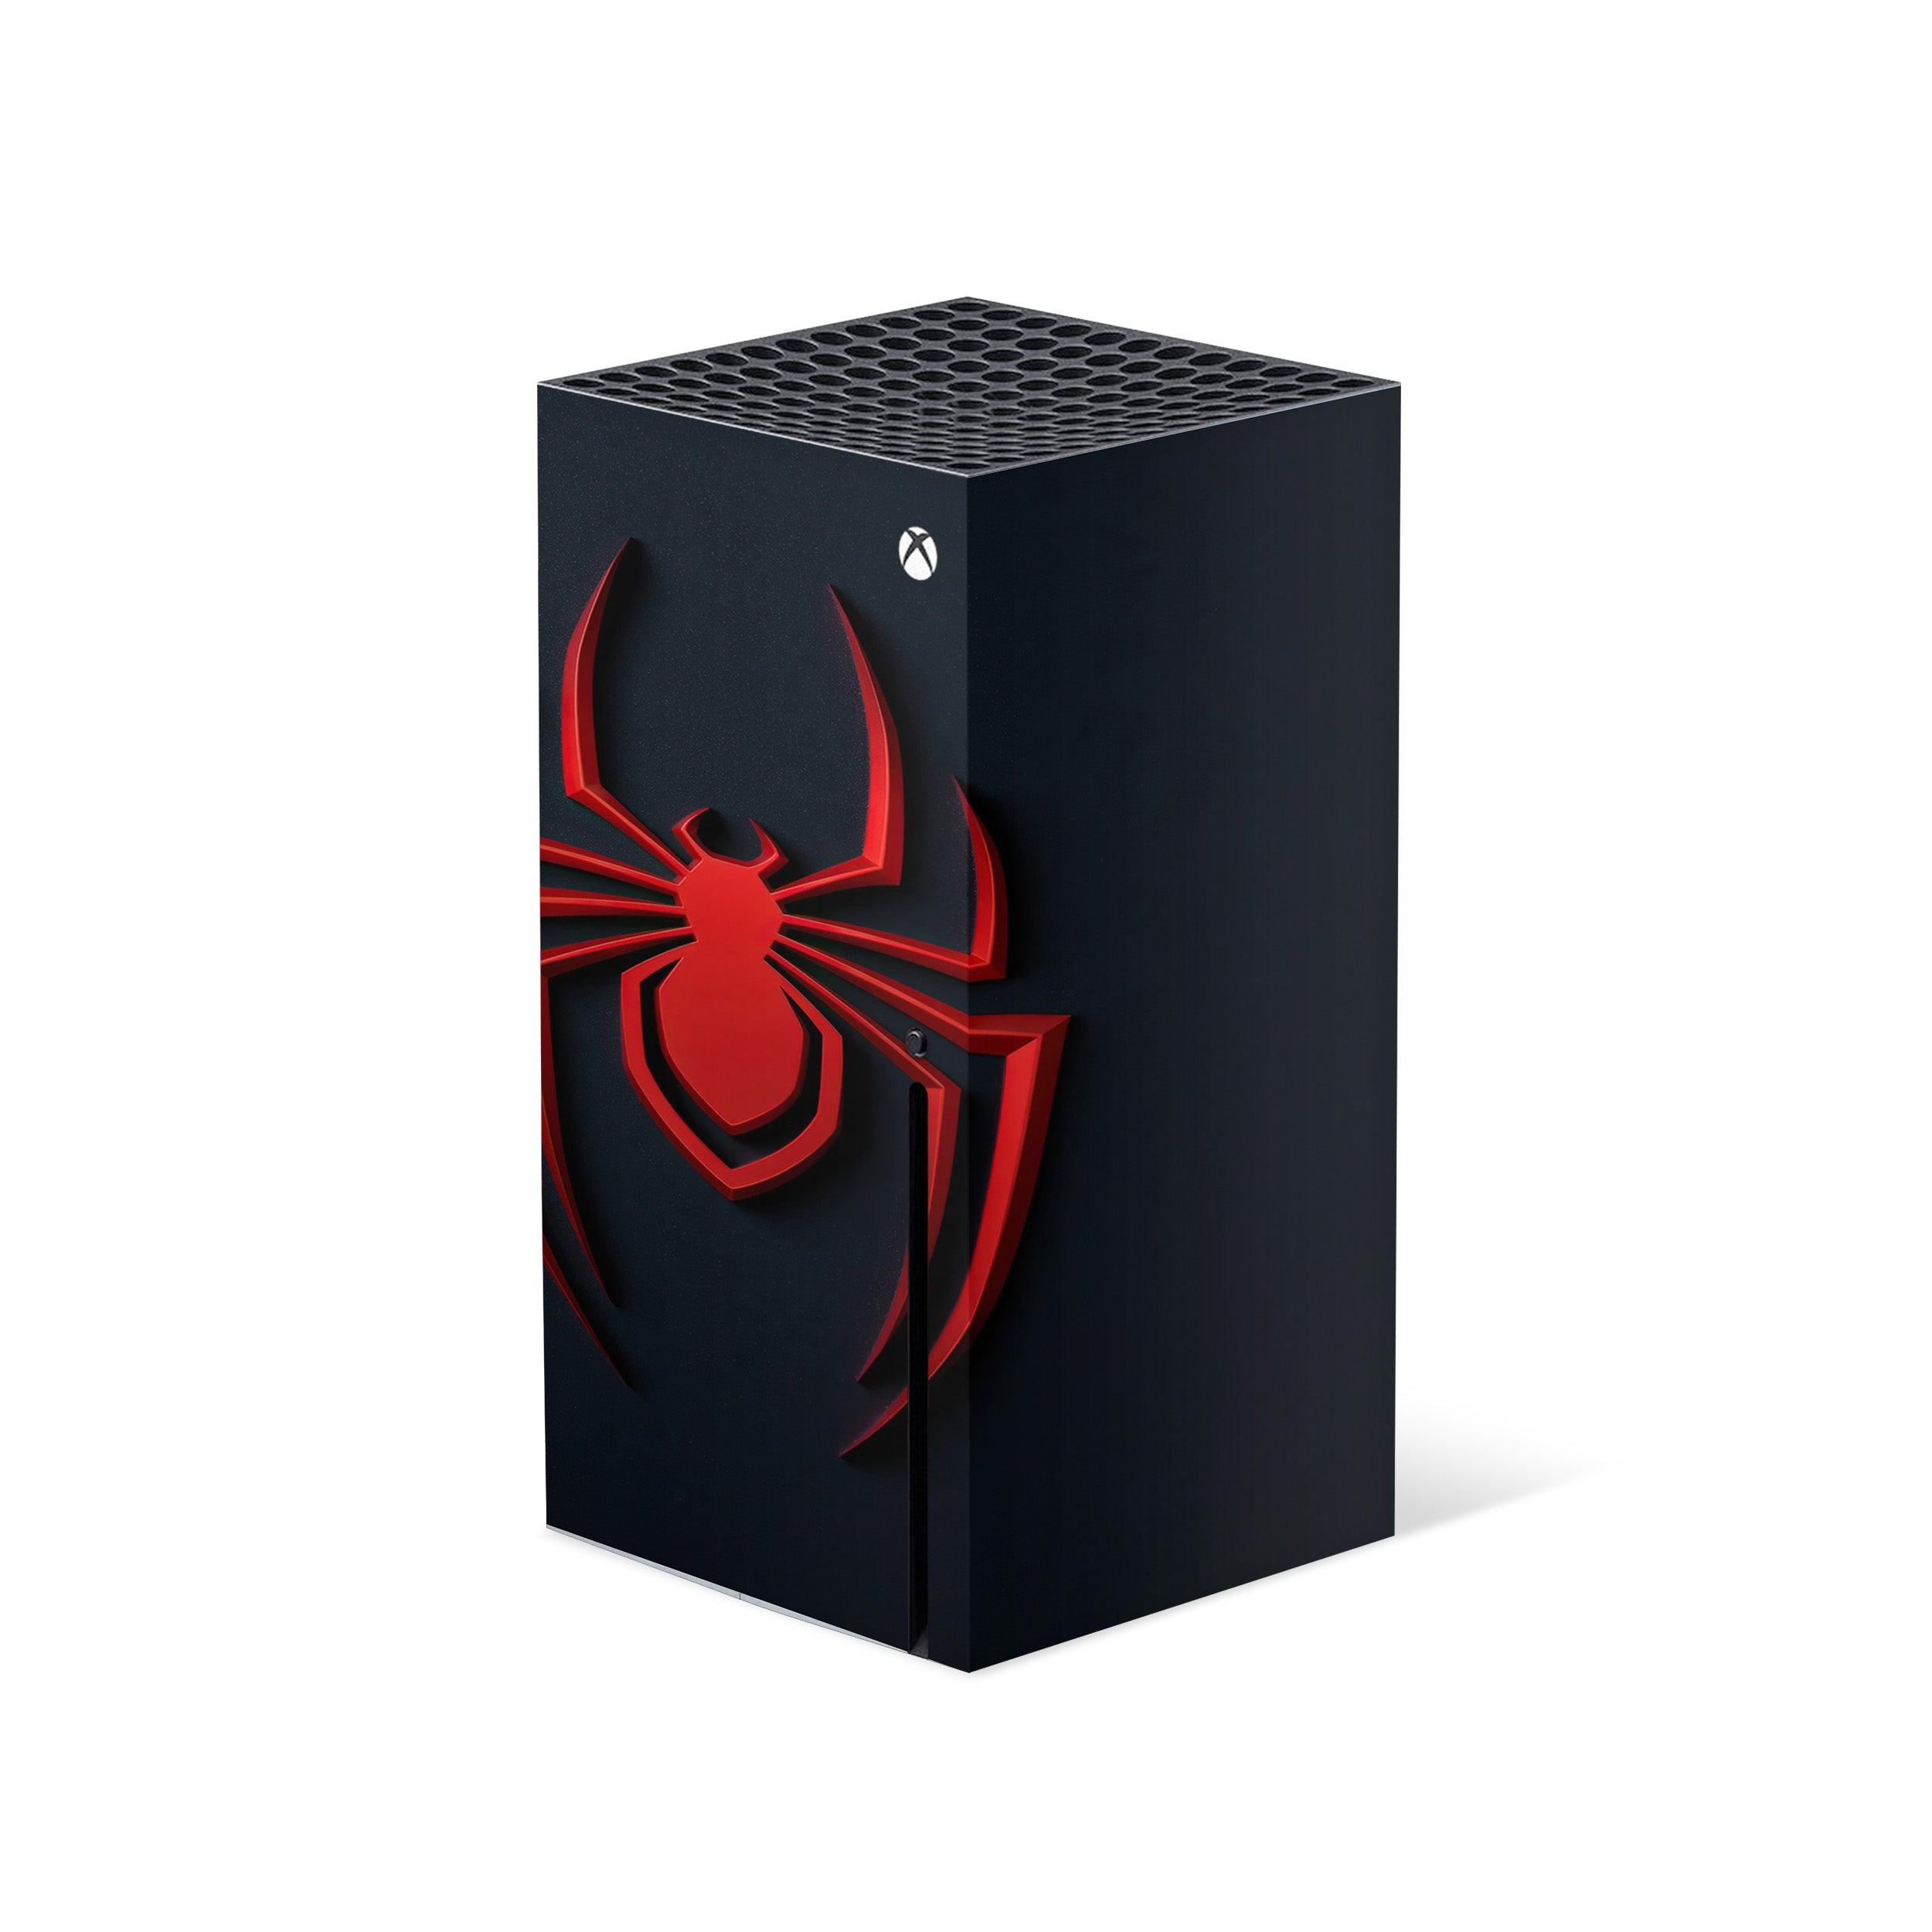 A video game skin featuring a Marvel Spiderman Miles Morales design for the Xbox Series X.